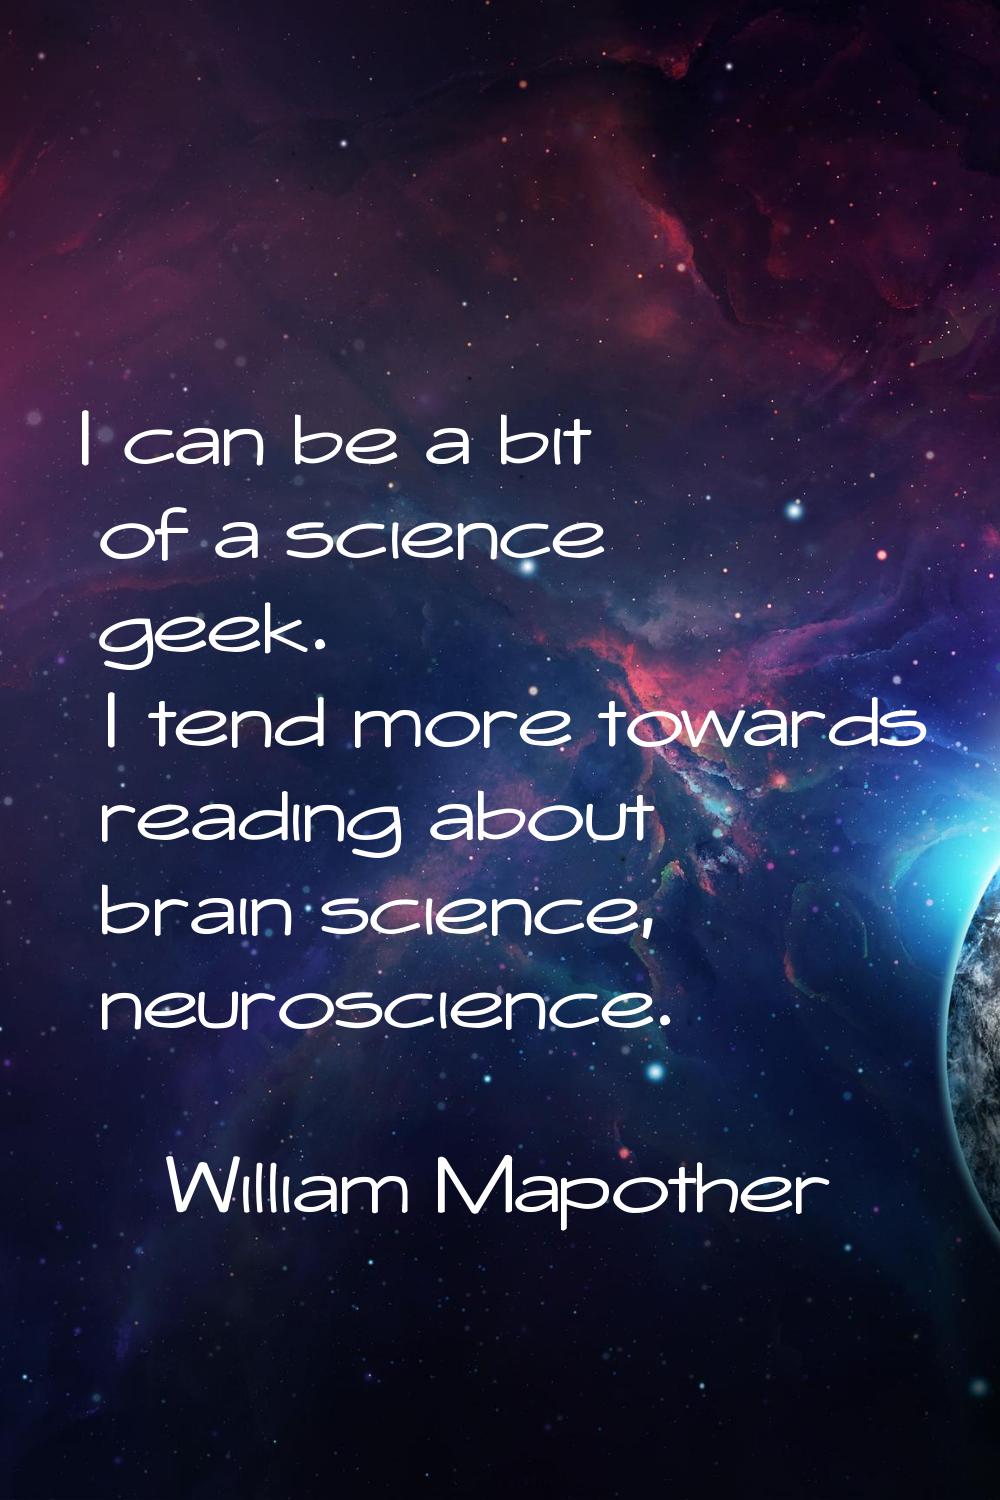 I can be a bit of a science geek. I tend more towards reading about brain science, neuroscience.